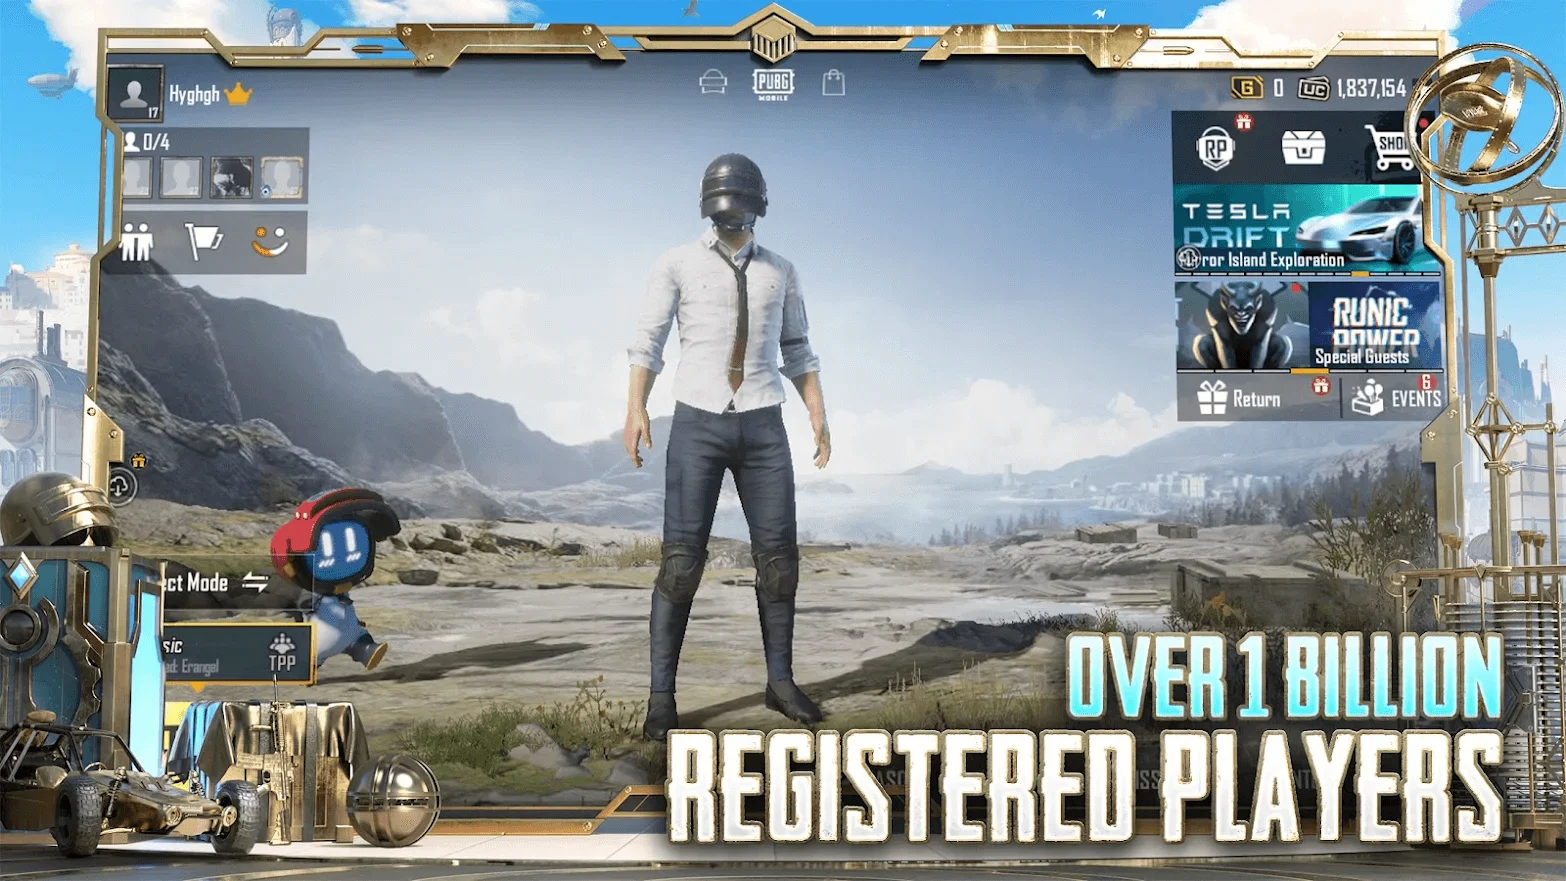 i want to download pubg for pc